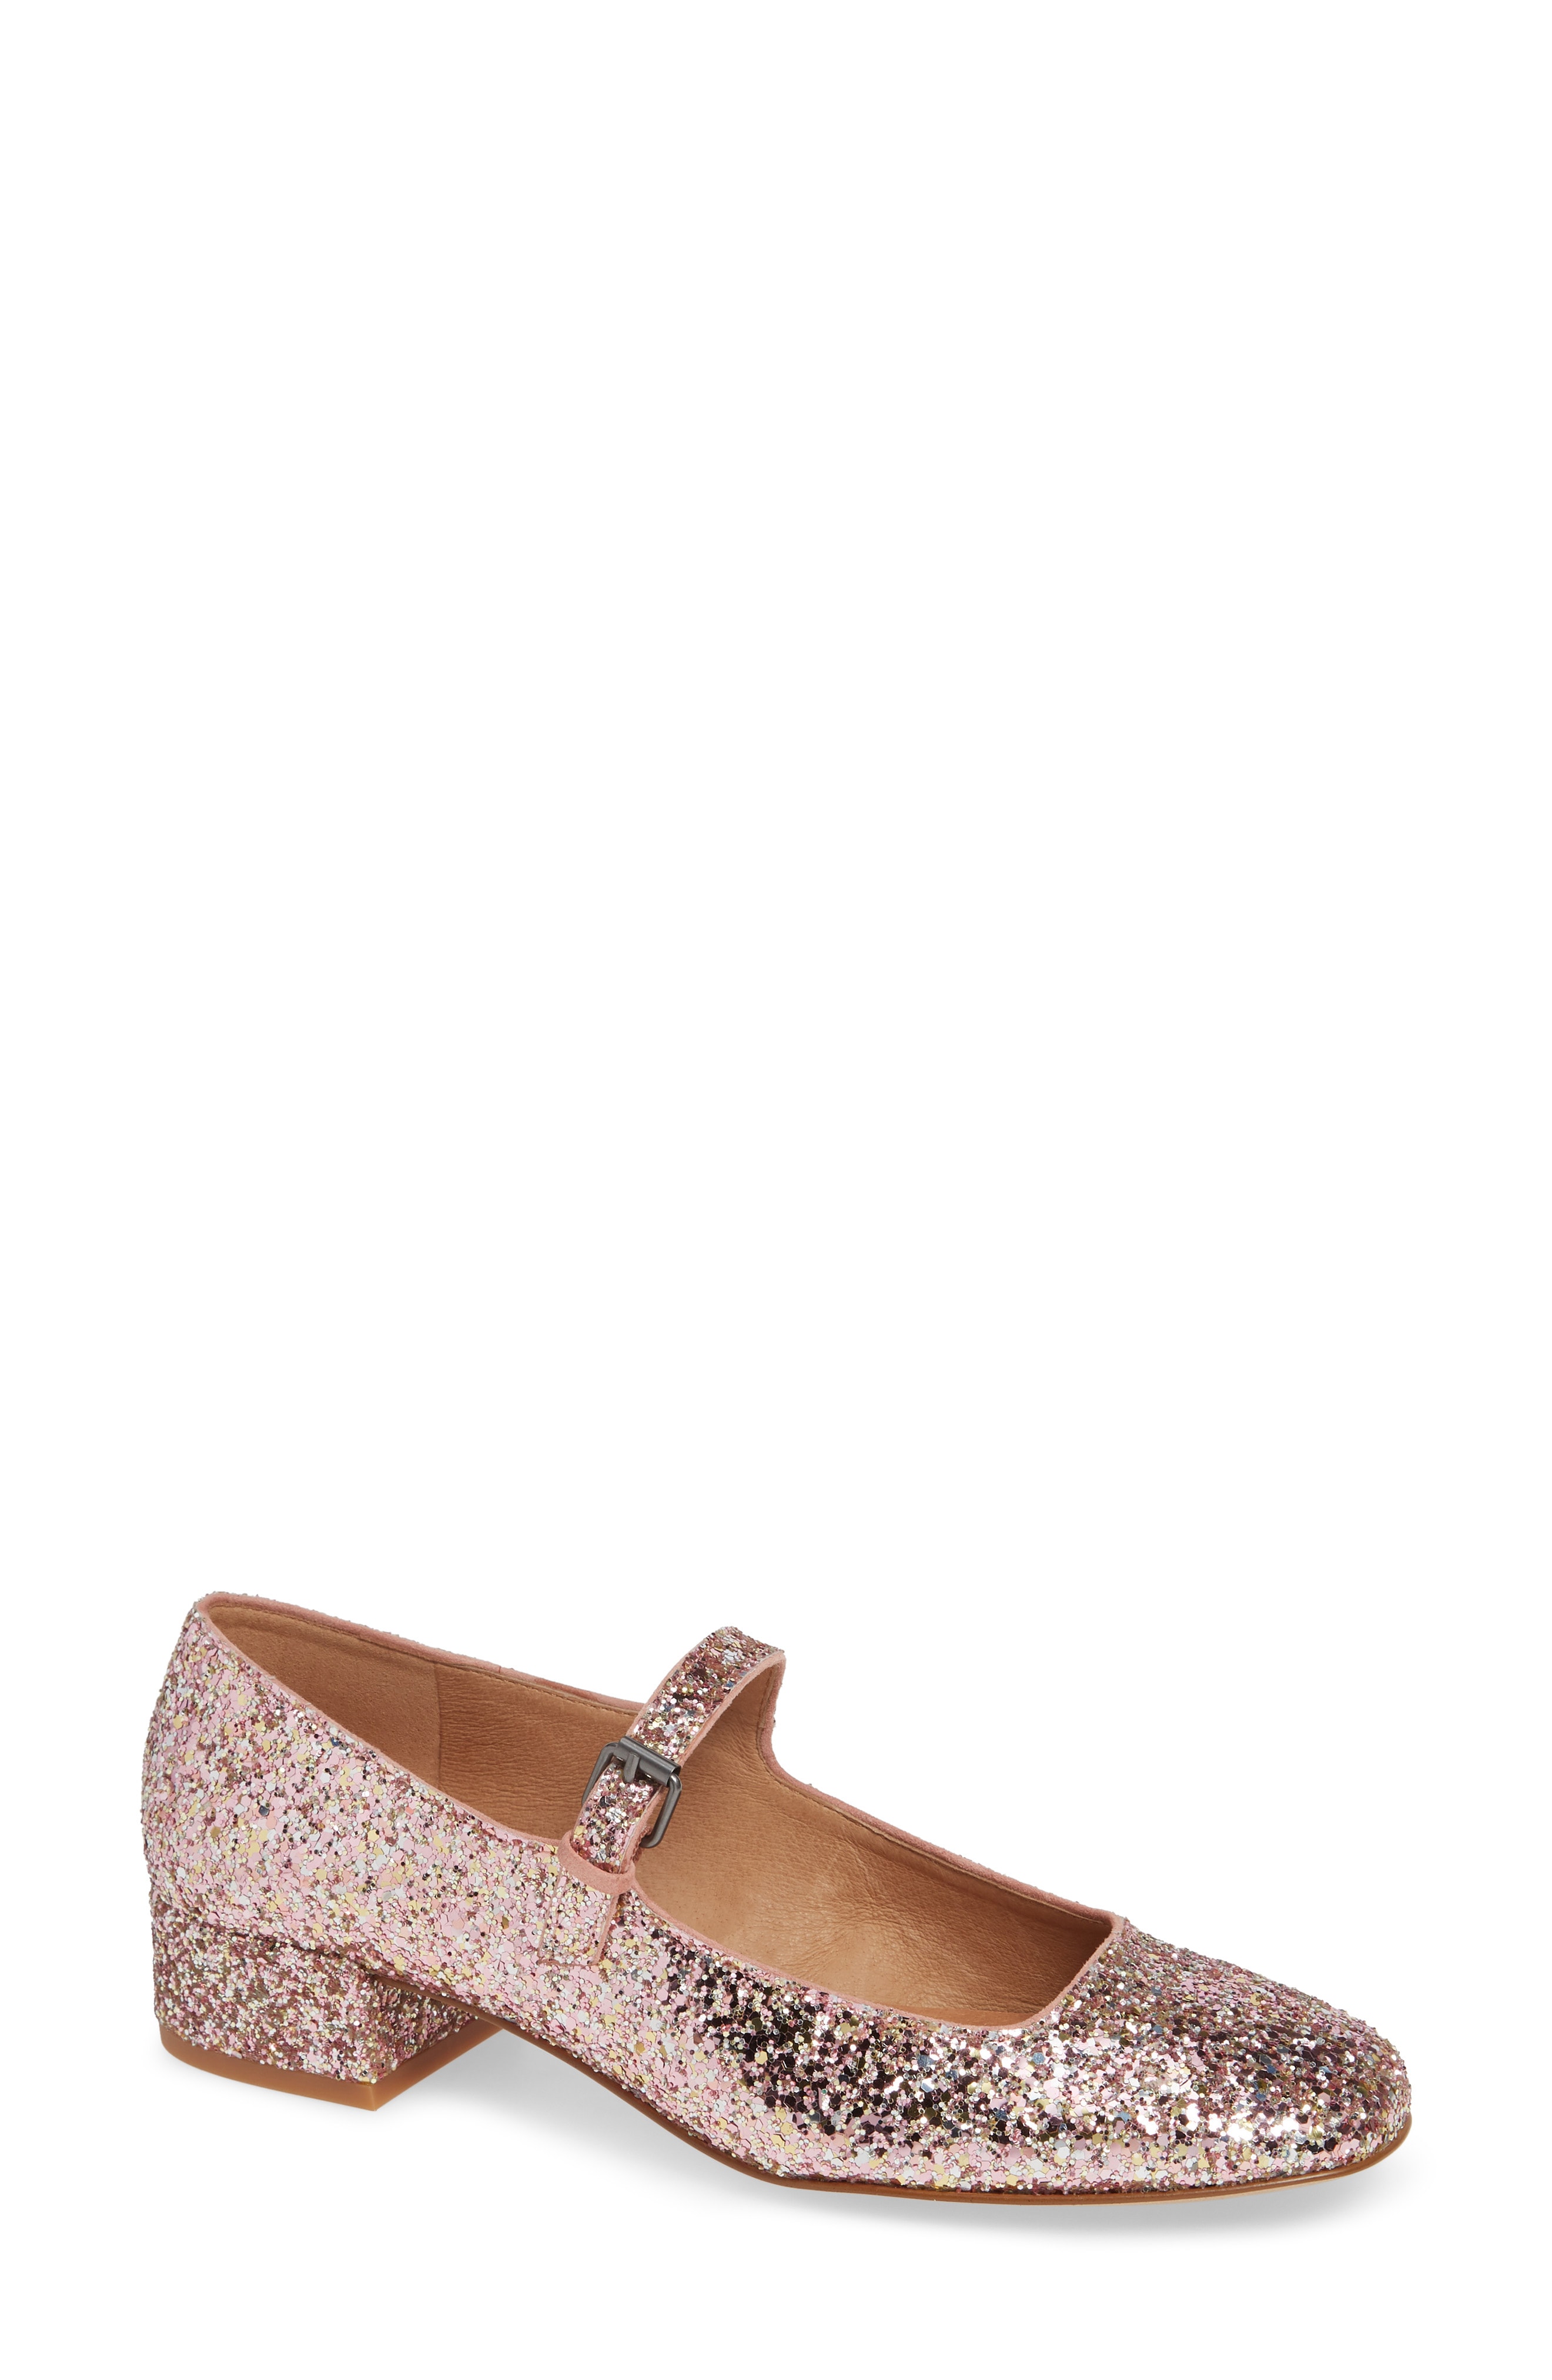 Madewell The Delilah Mary Jane Pump (Women)